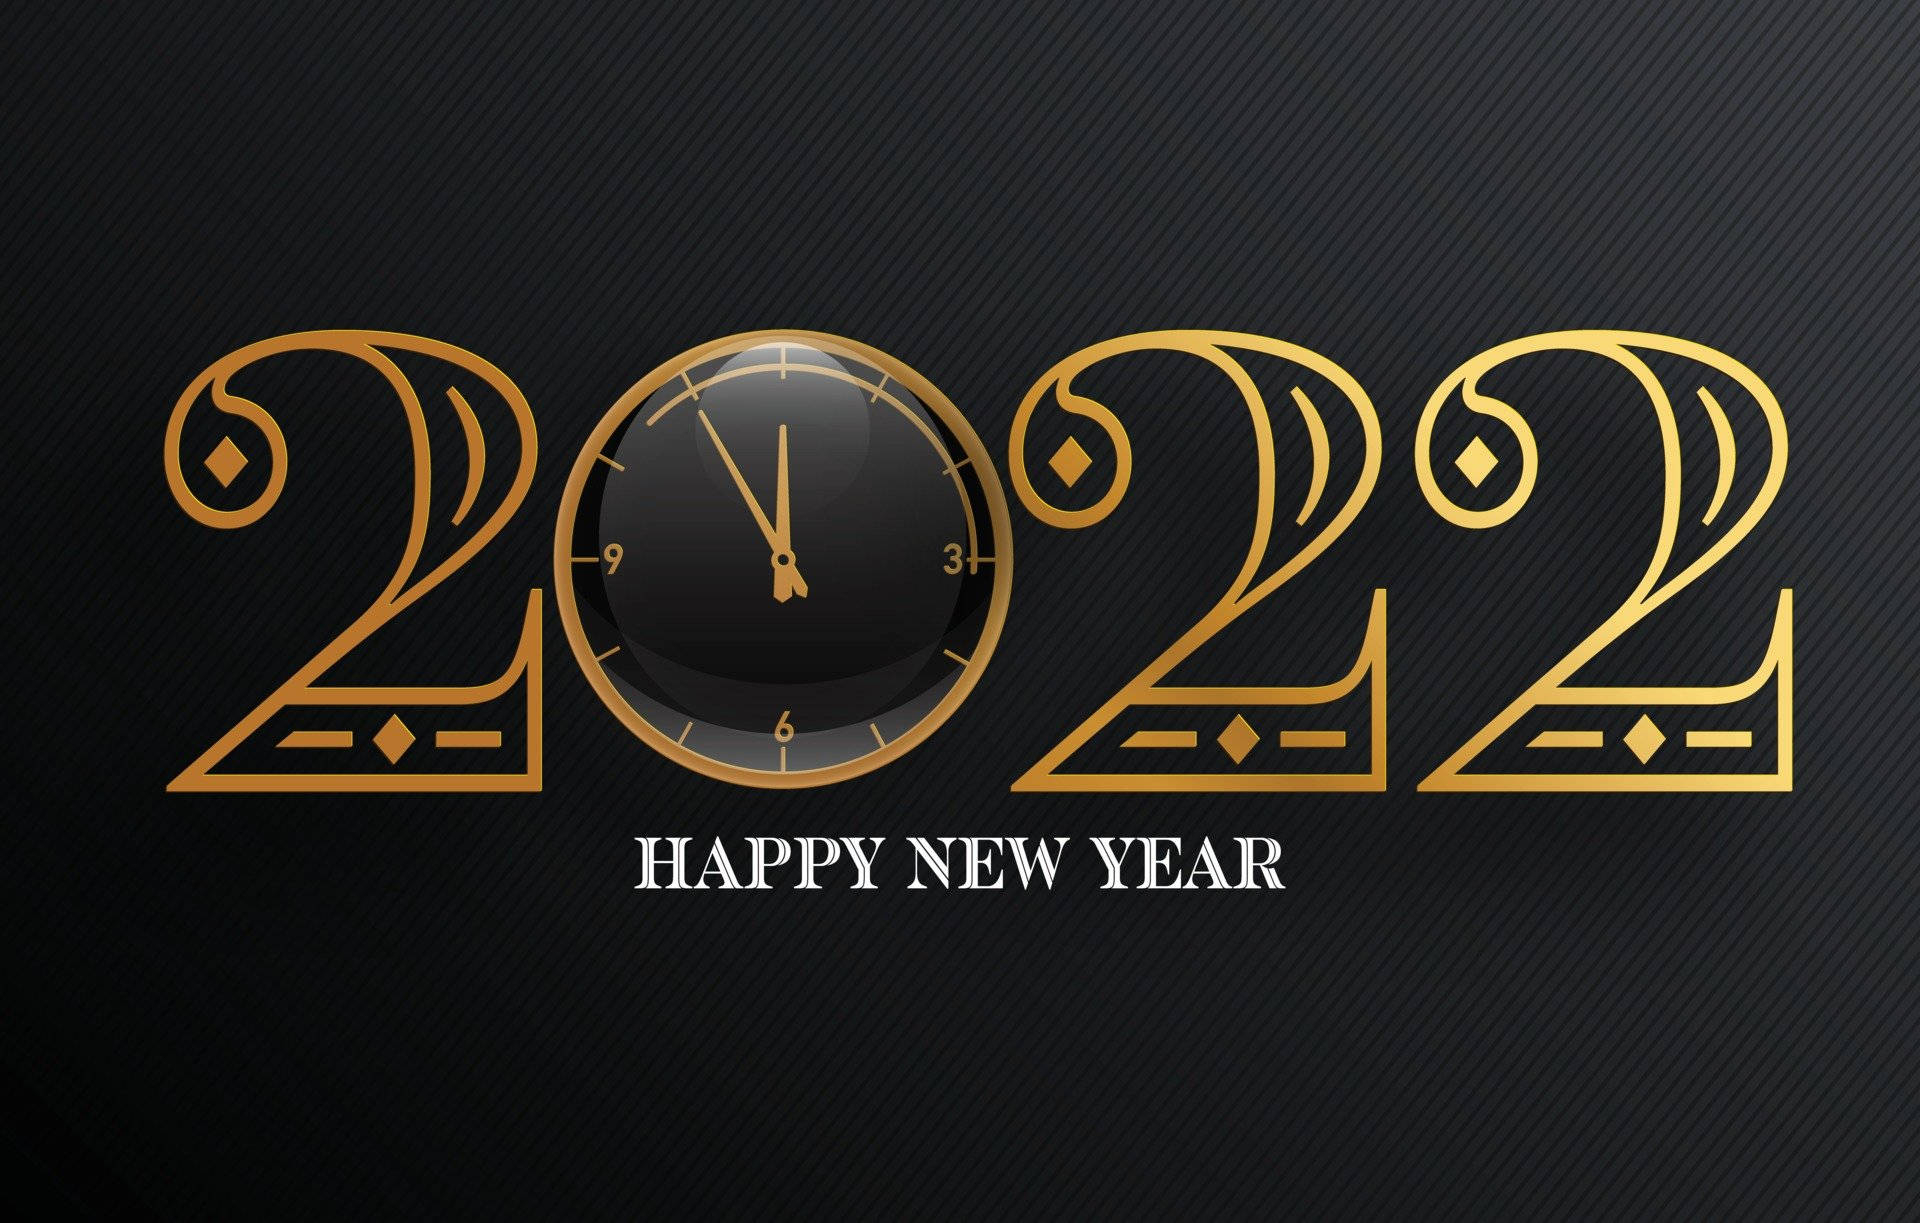 Happy New Year 2022 Gold Clock Background